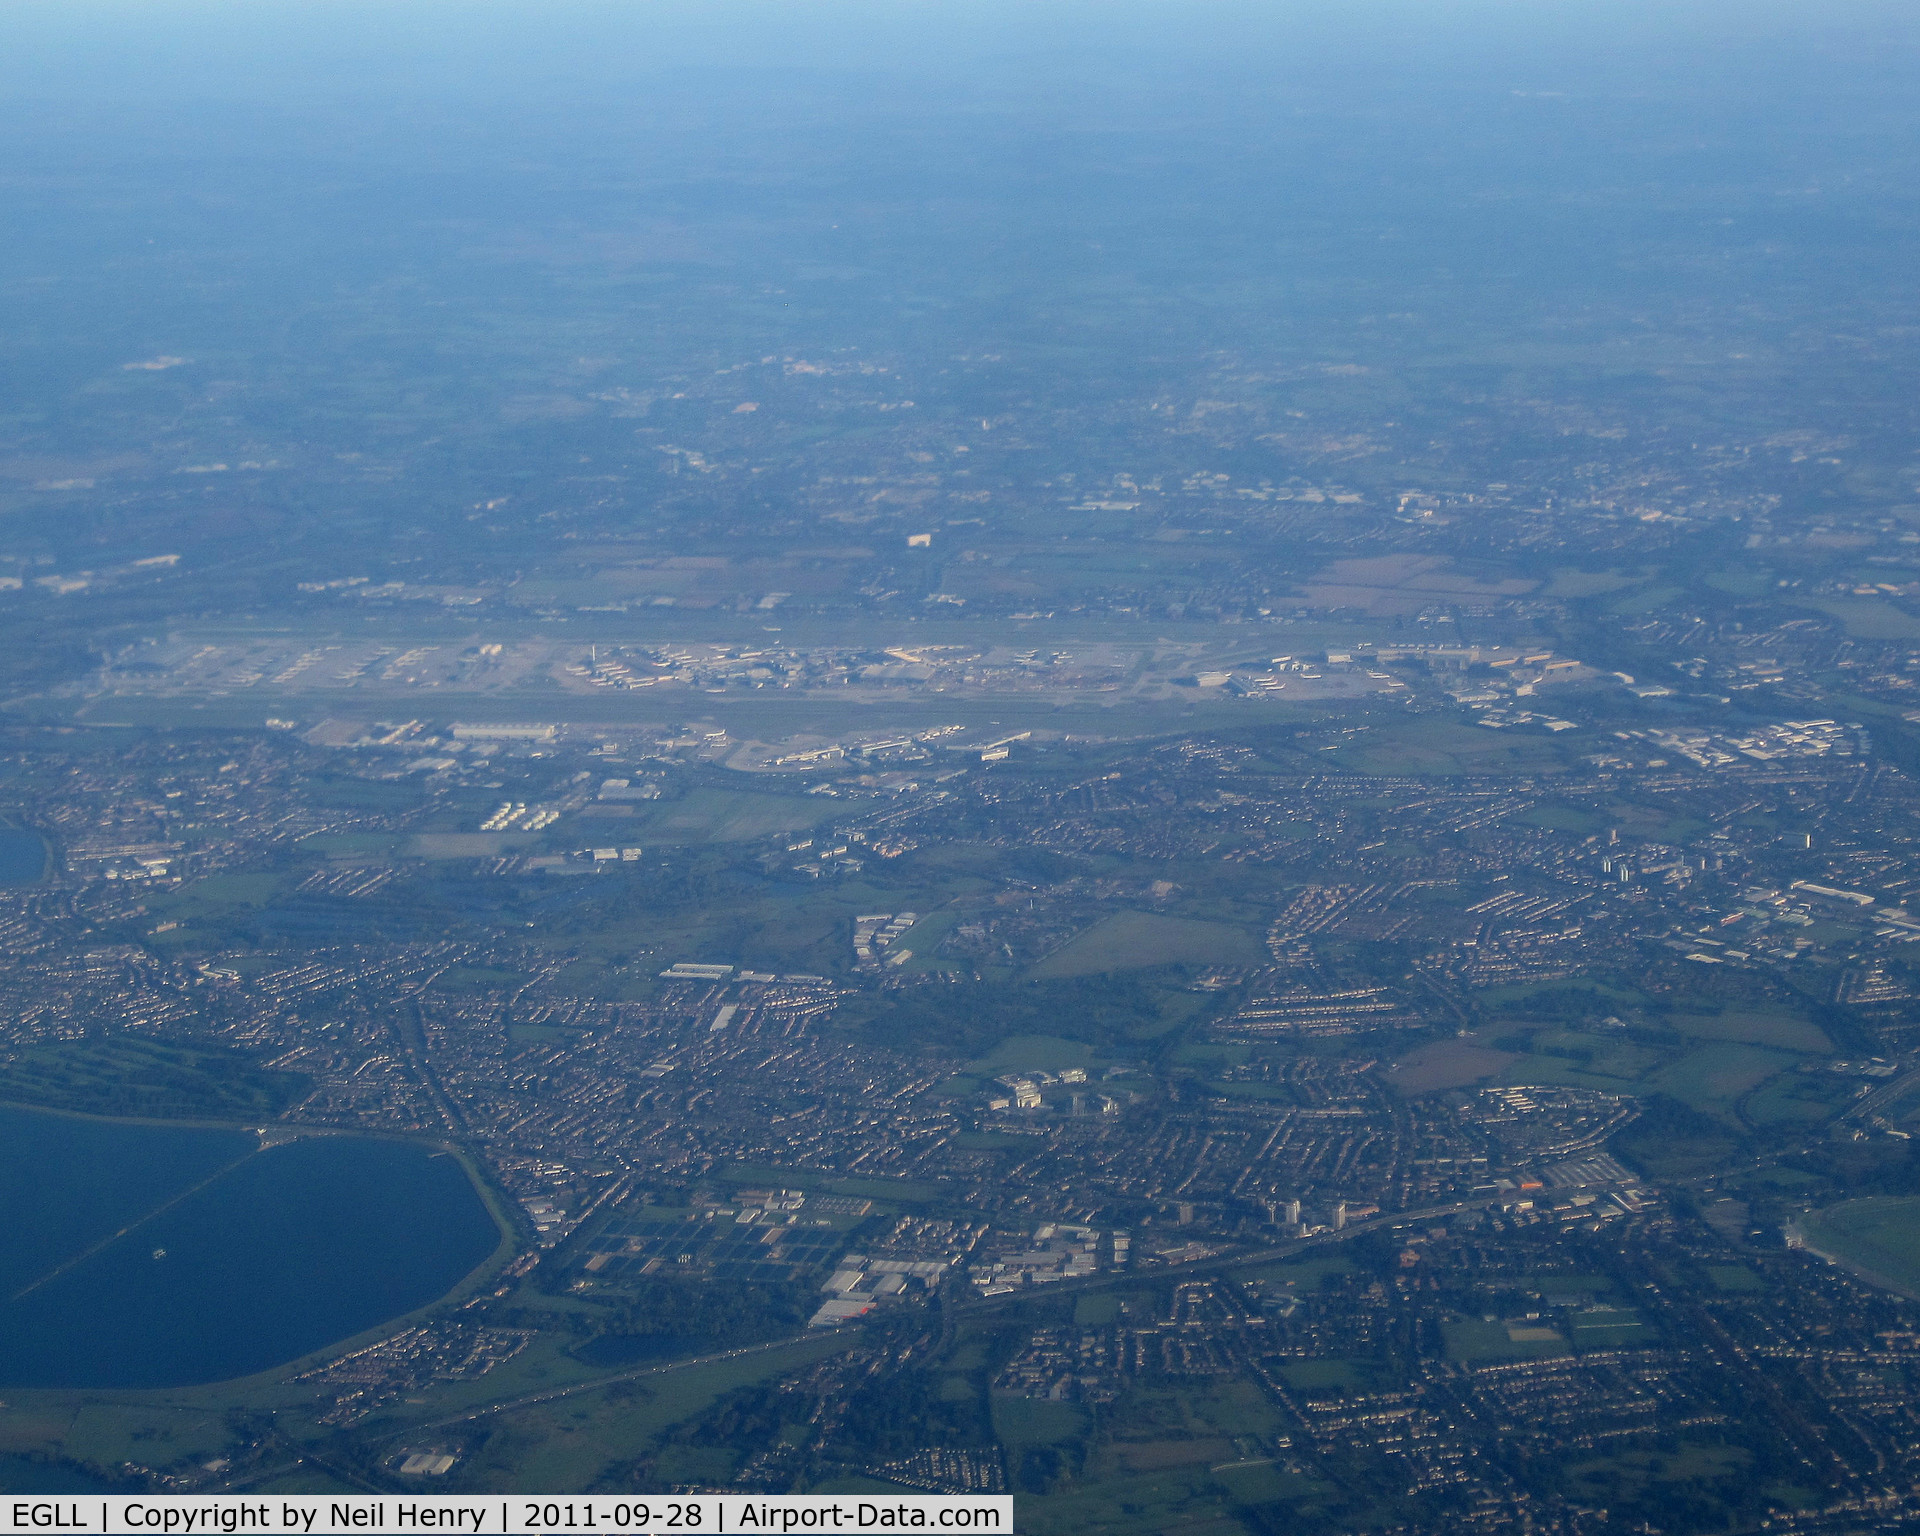 London Heathrow Airport, London, England United Kingdom (EGLL) - taken whilst stacked on approach to LHR on 28 Sept 2011 about 08.00 hours